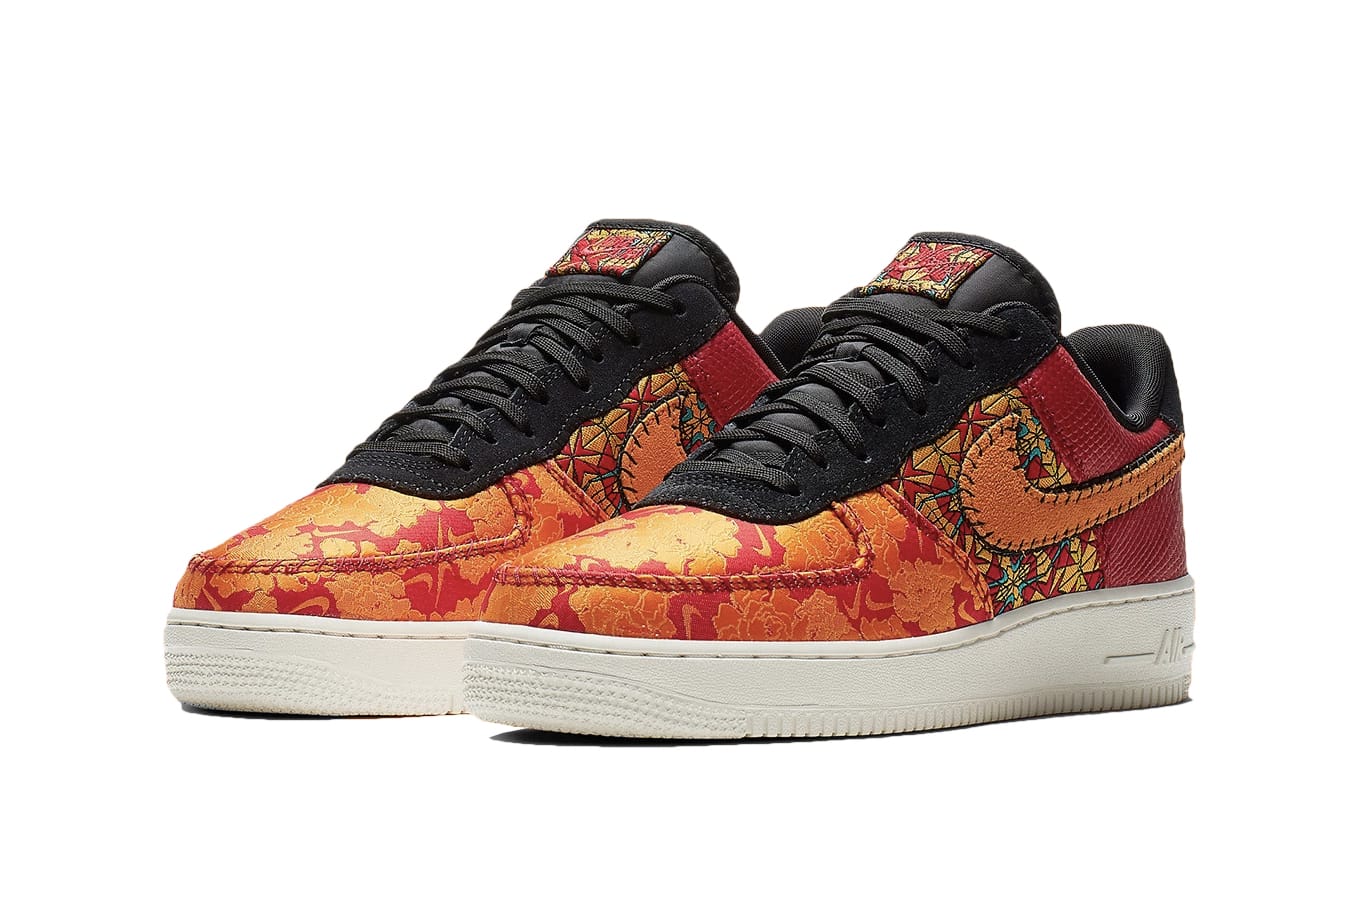 Nike Gives Air Force 1 an Ornate 